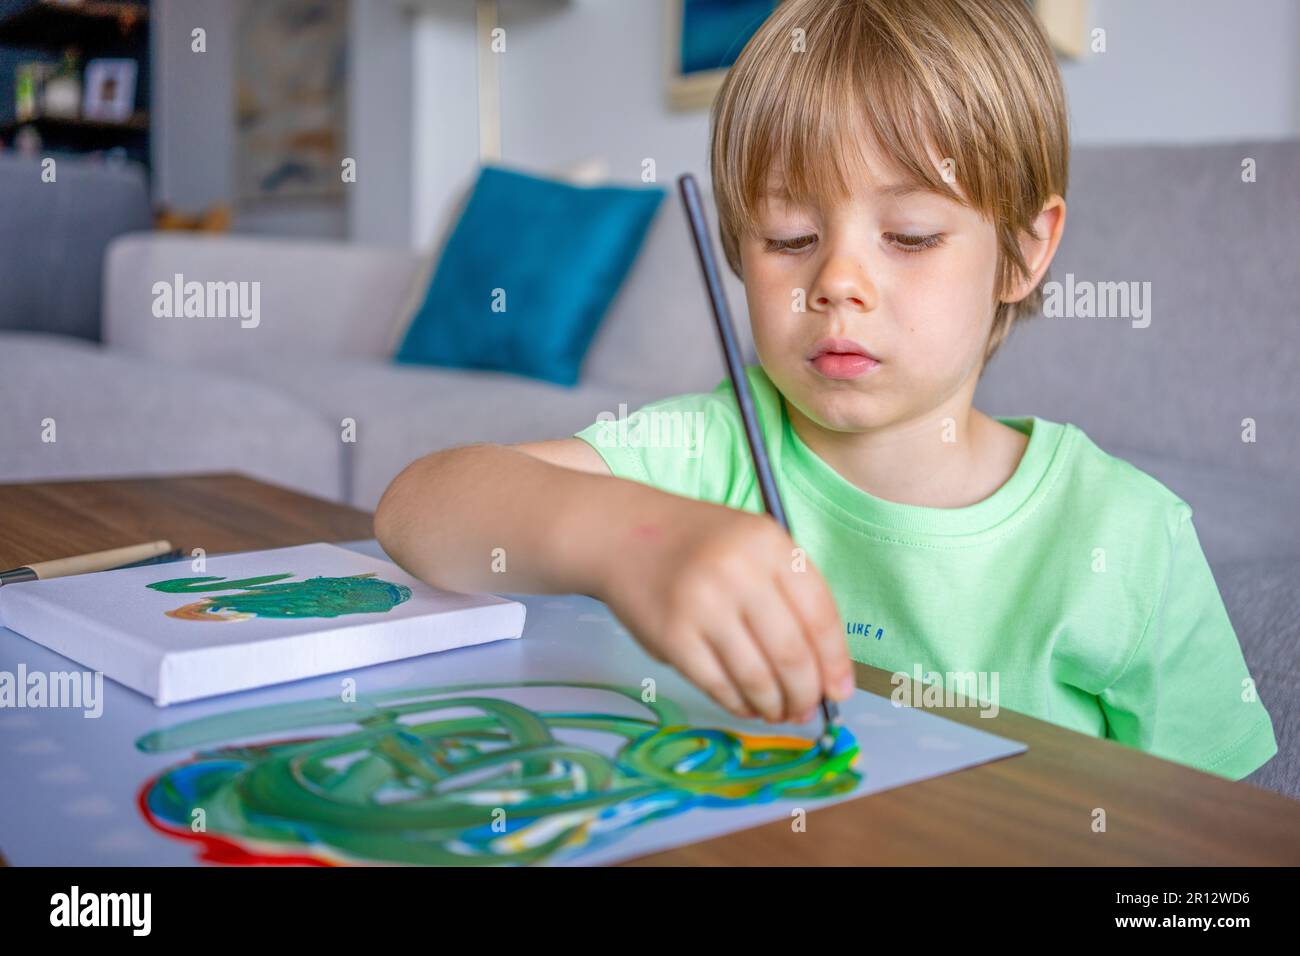 Cute child boy painting with a brush in living room. Stock Photo